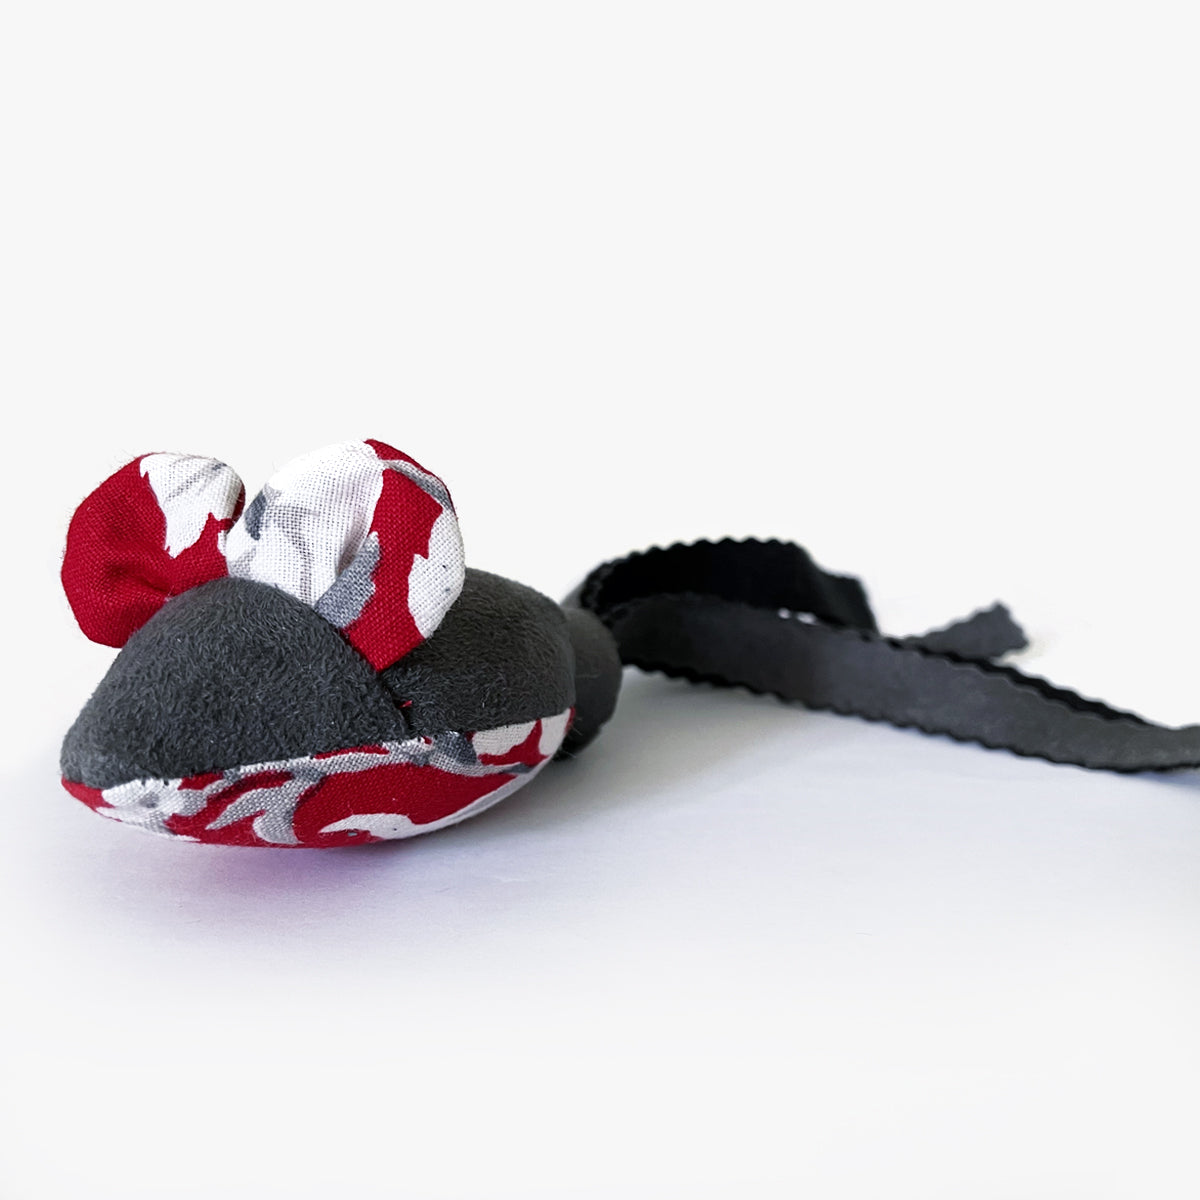 Homycat Catnip Toy Mouse For Cats, In Dark Grey & Red | at Made Moggie